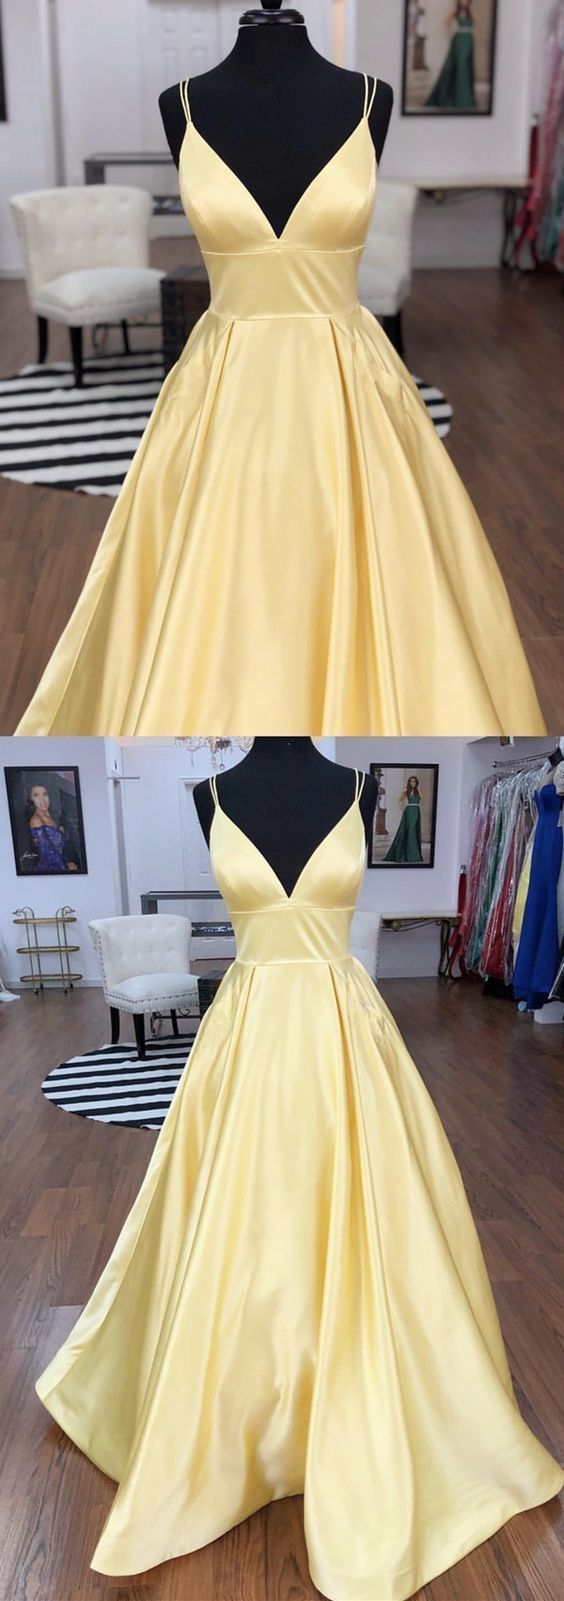 Sexy Straps V-neck Satin Long Prom Dresses 2019 With Pocket -   18 dress Yellow formal ideas